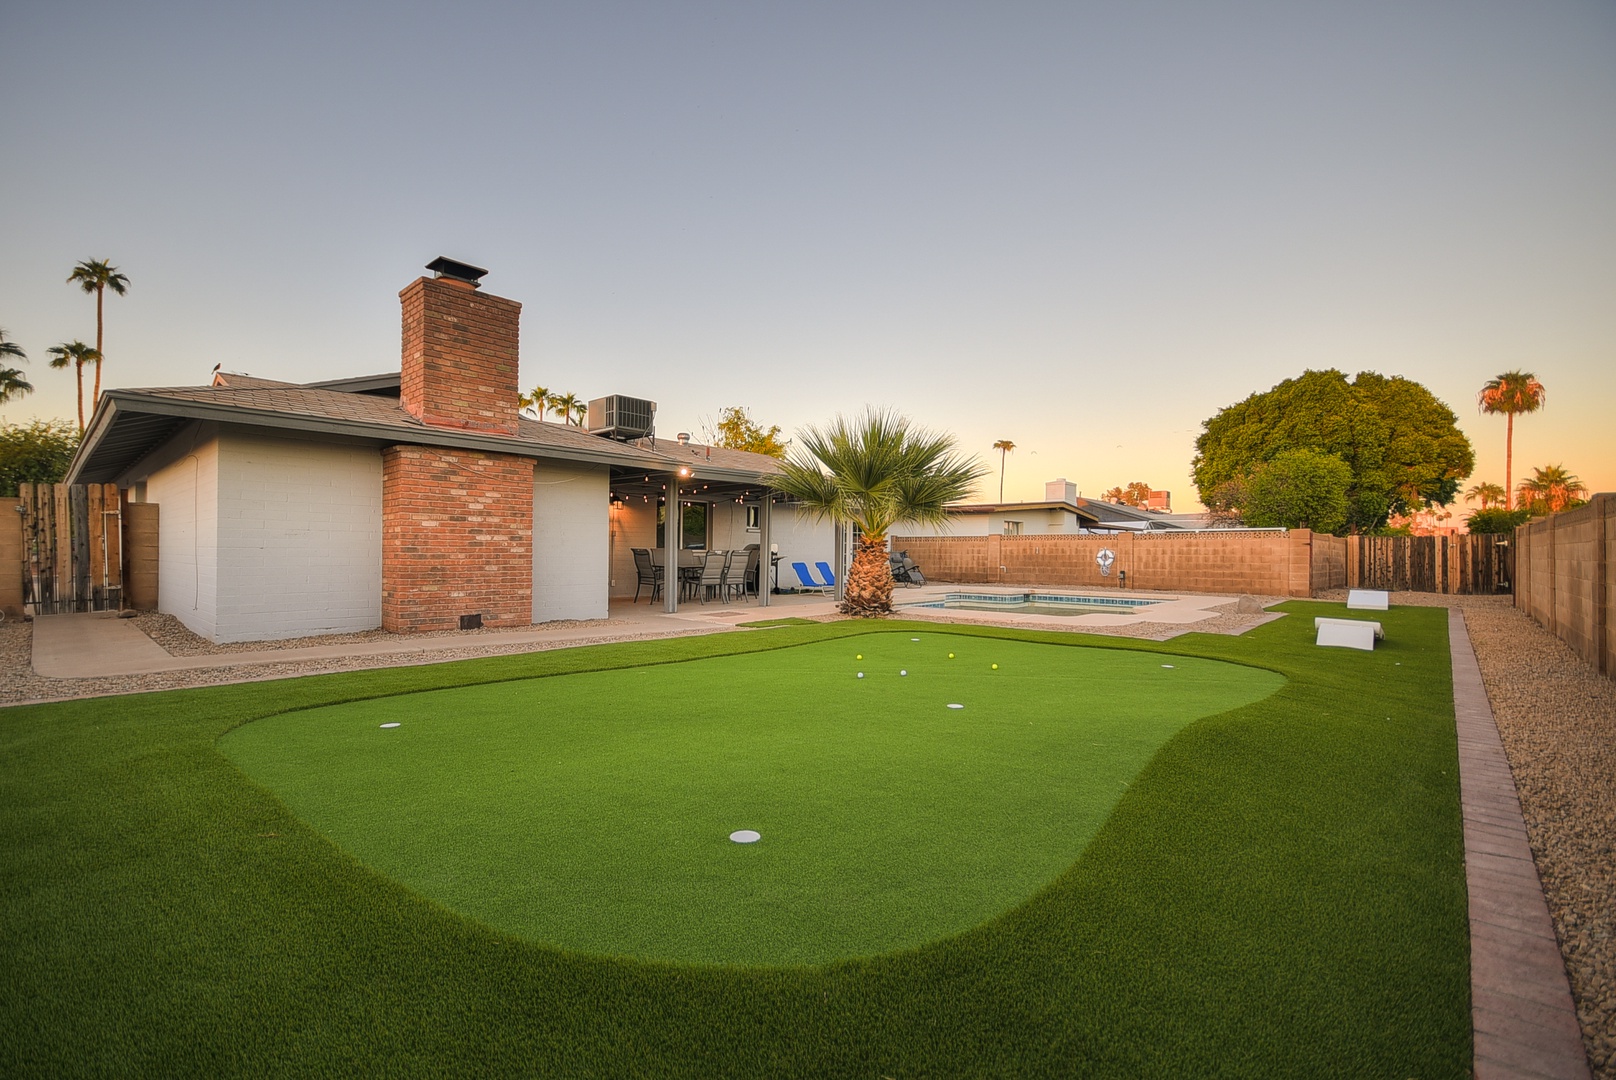 Putting green to practice your short shot.